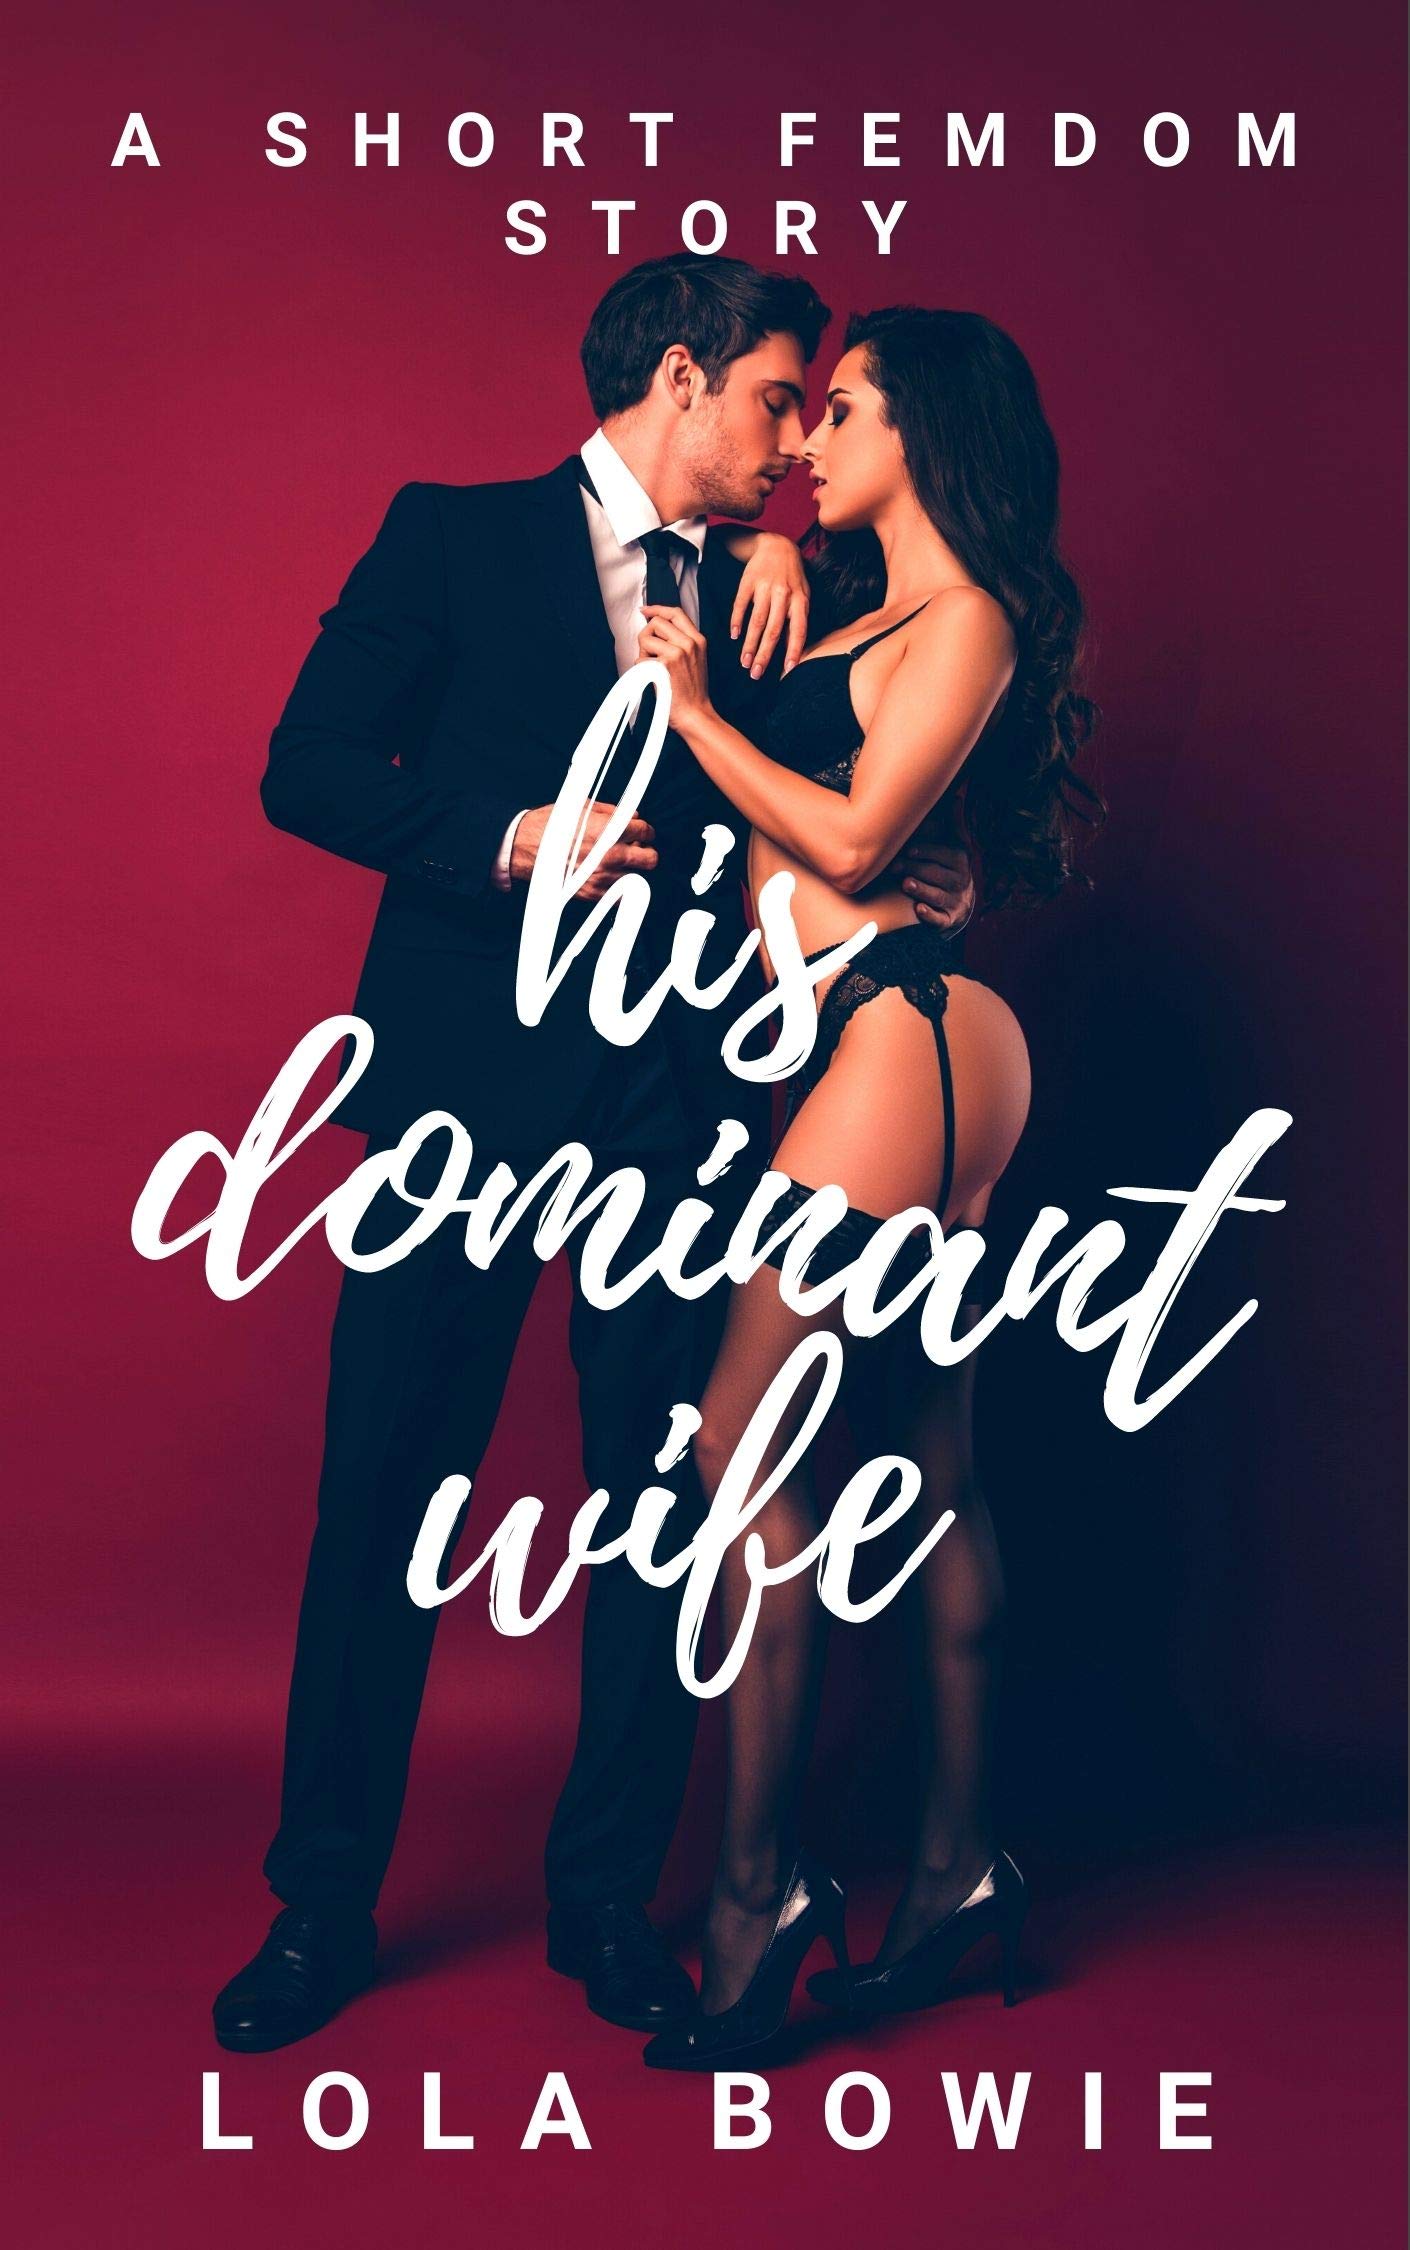 david thomas arthur recommends how to be a dominant wife pic